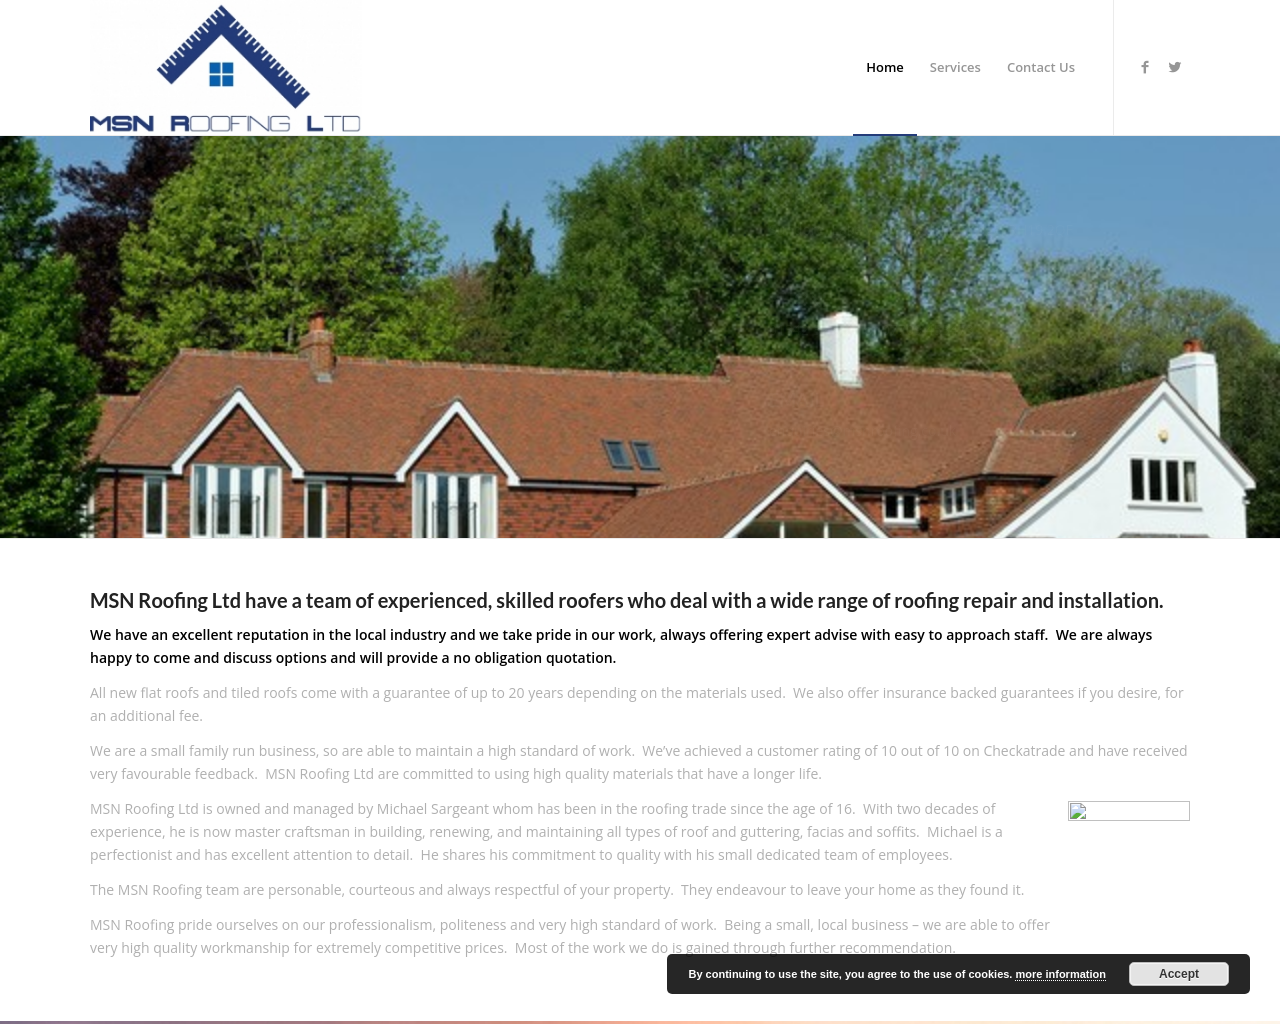 msnroofing.co.uk